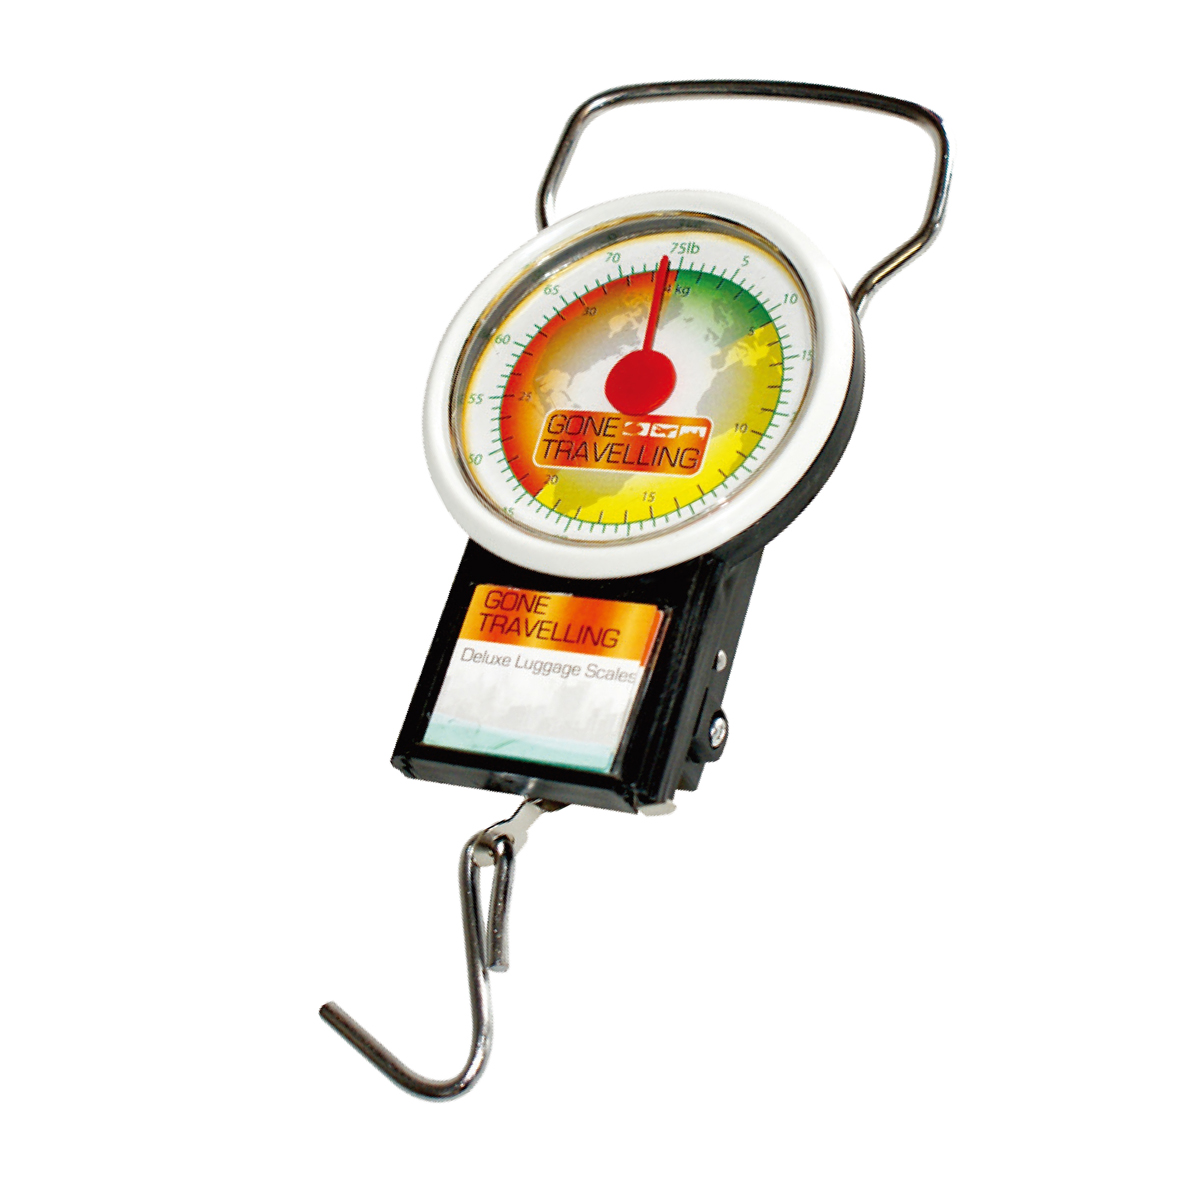 Deluxe luggage Scales GW9645